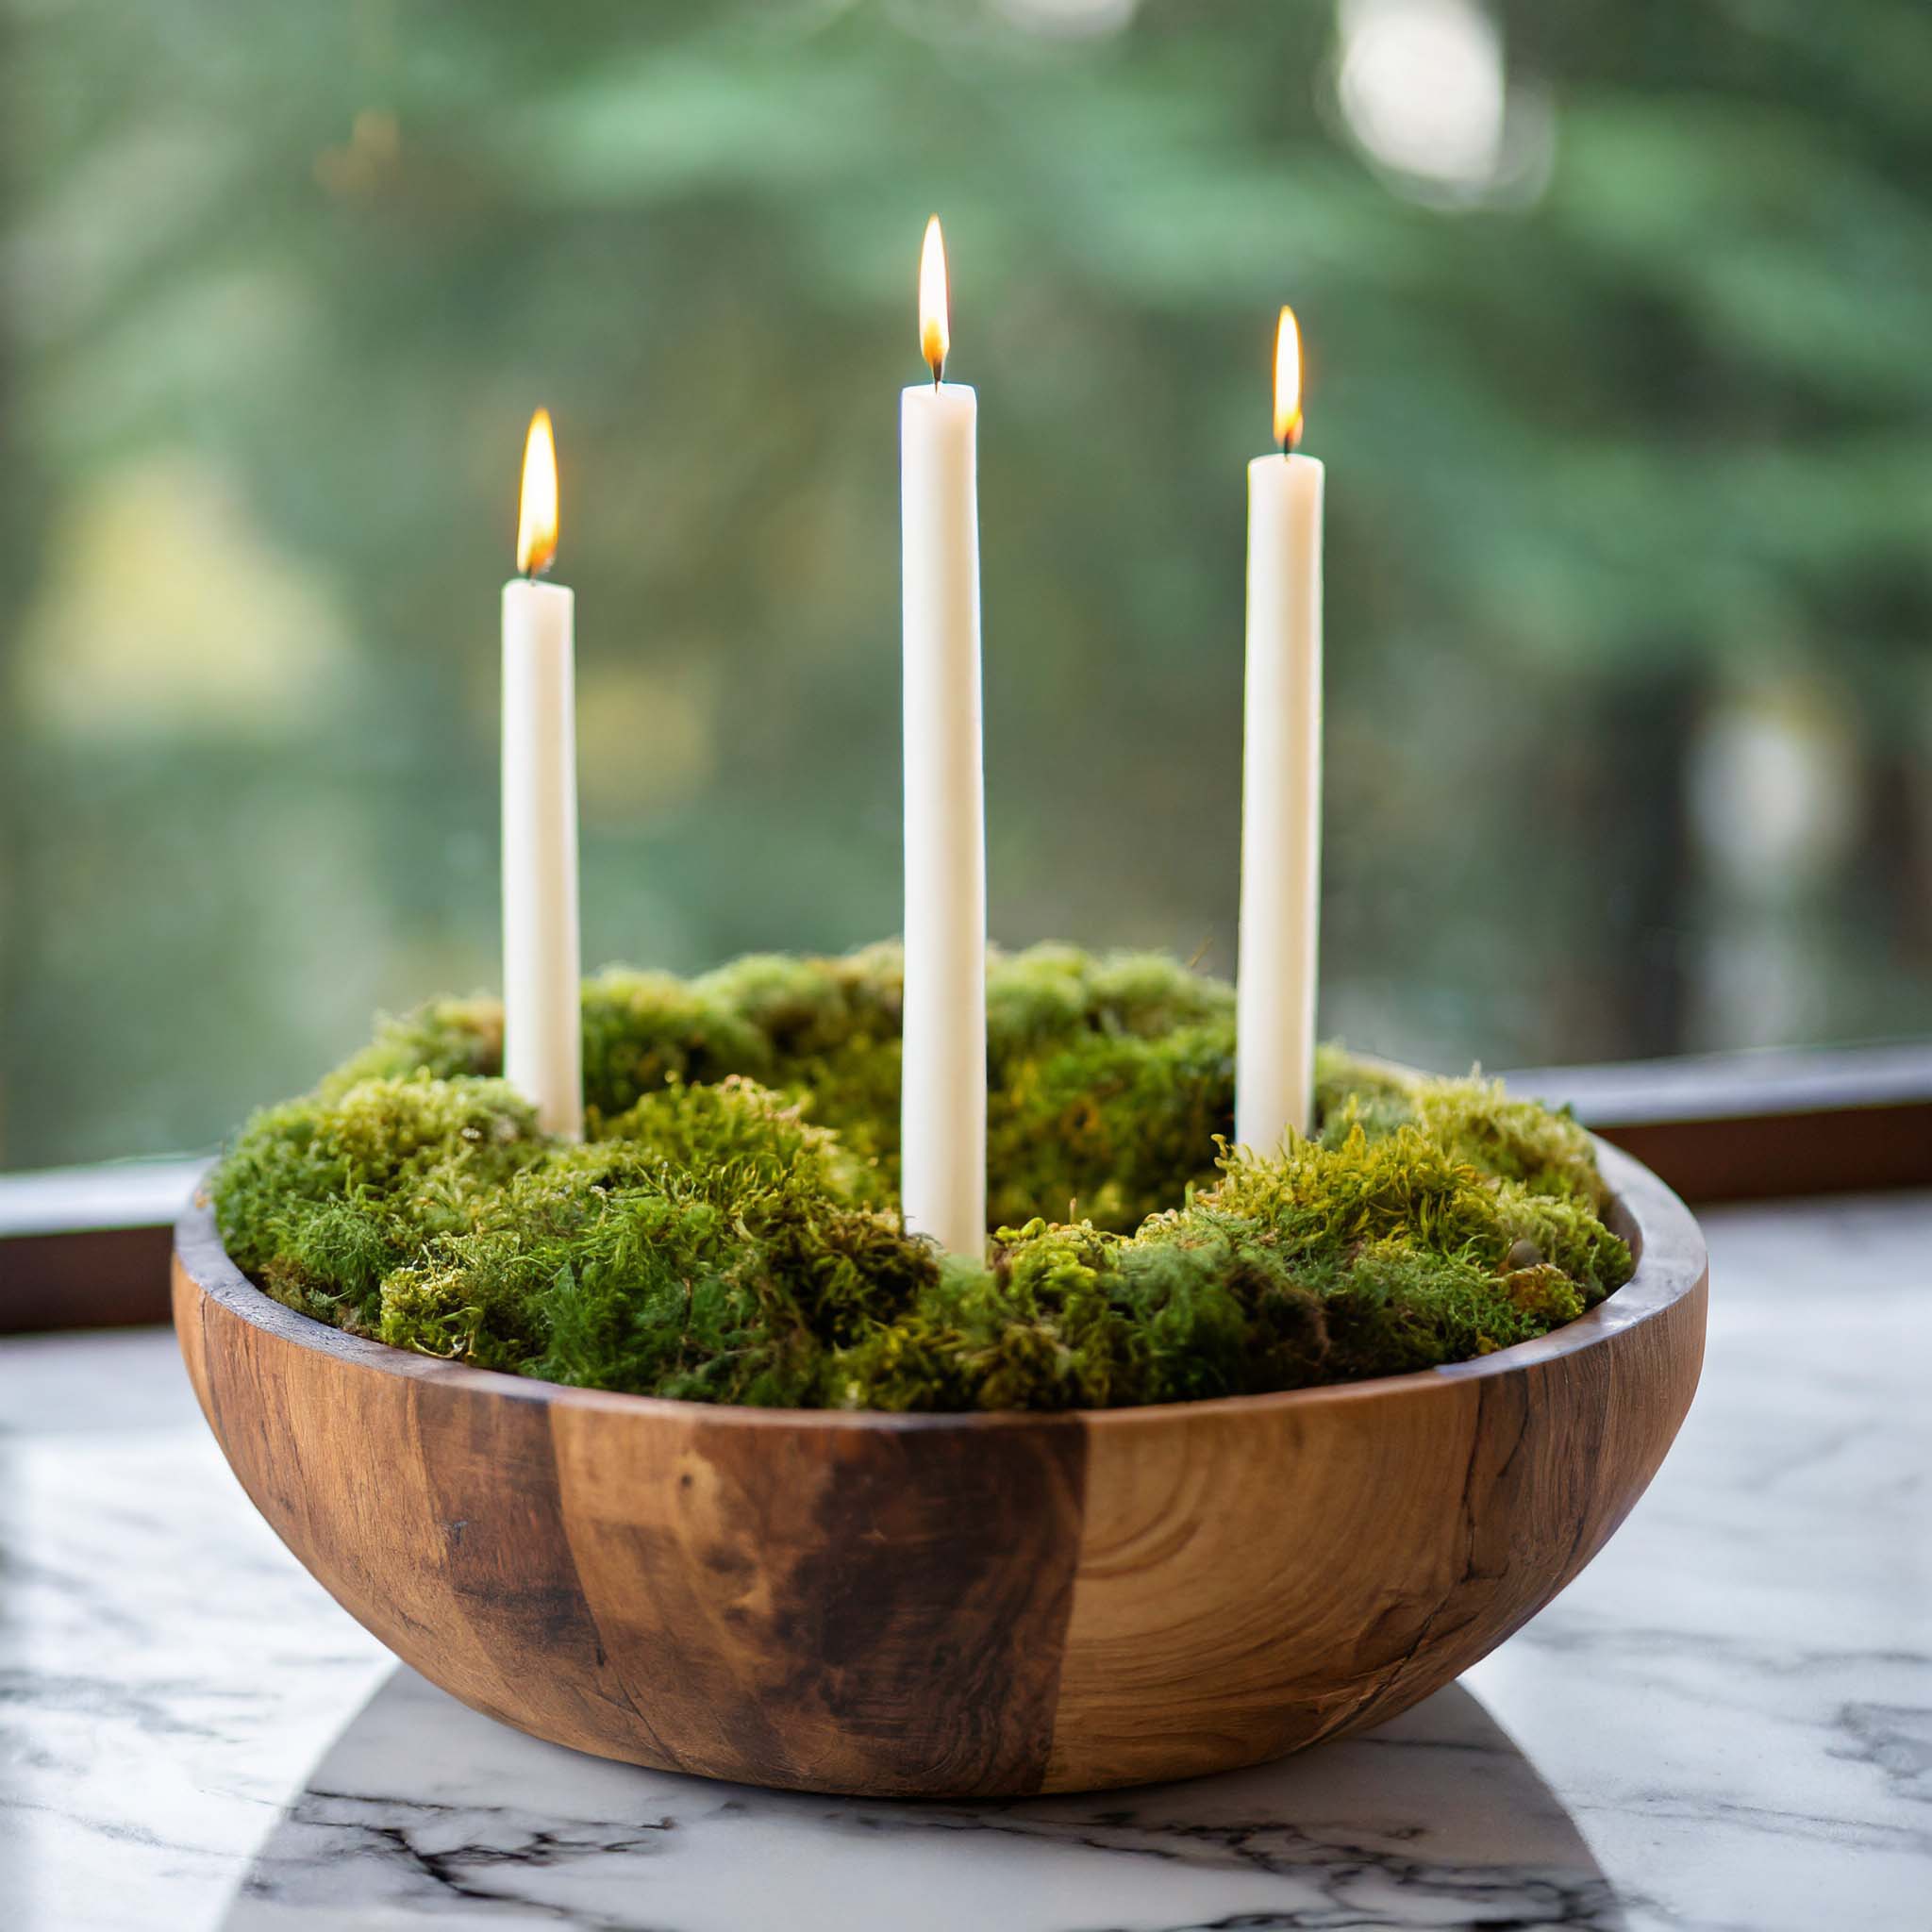 Round wooden dough bowl filled with moss and tapered candles on marble table in front of window.